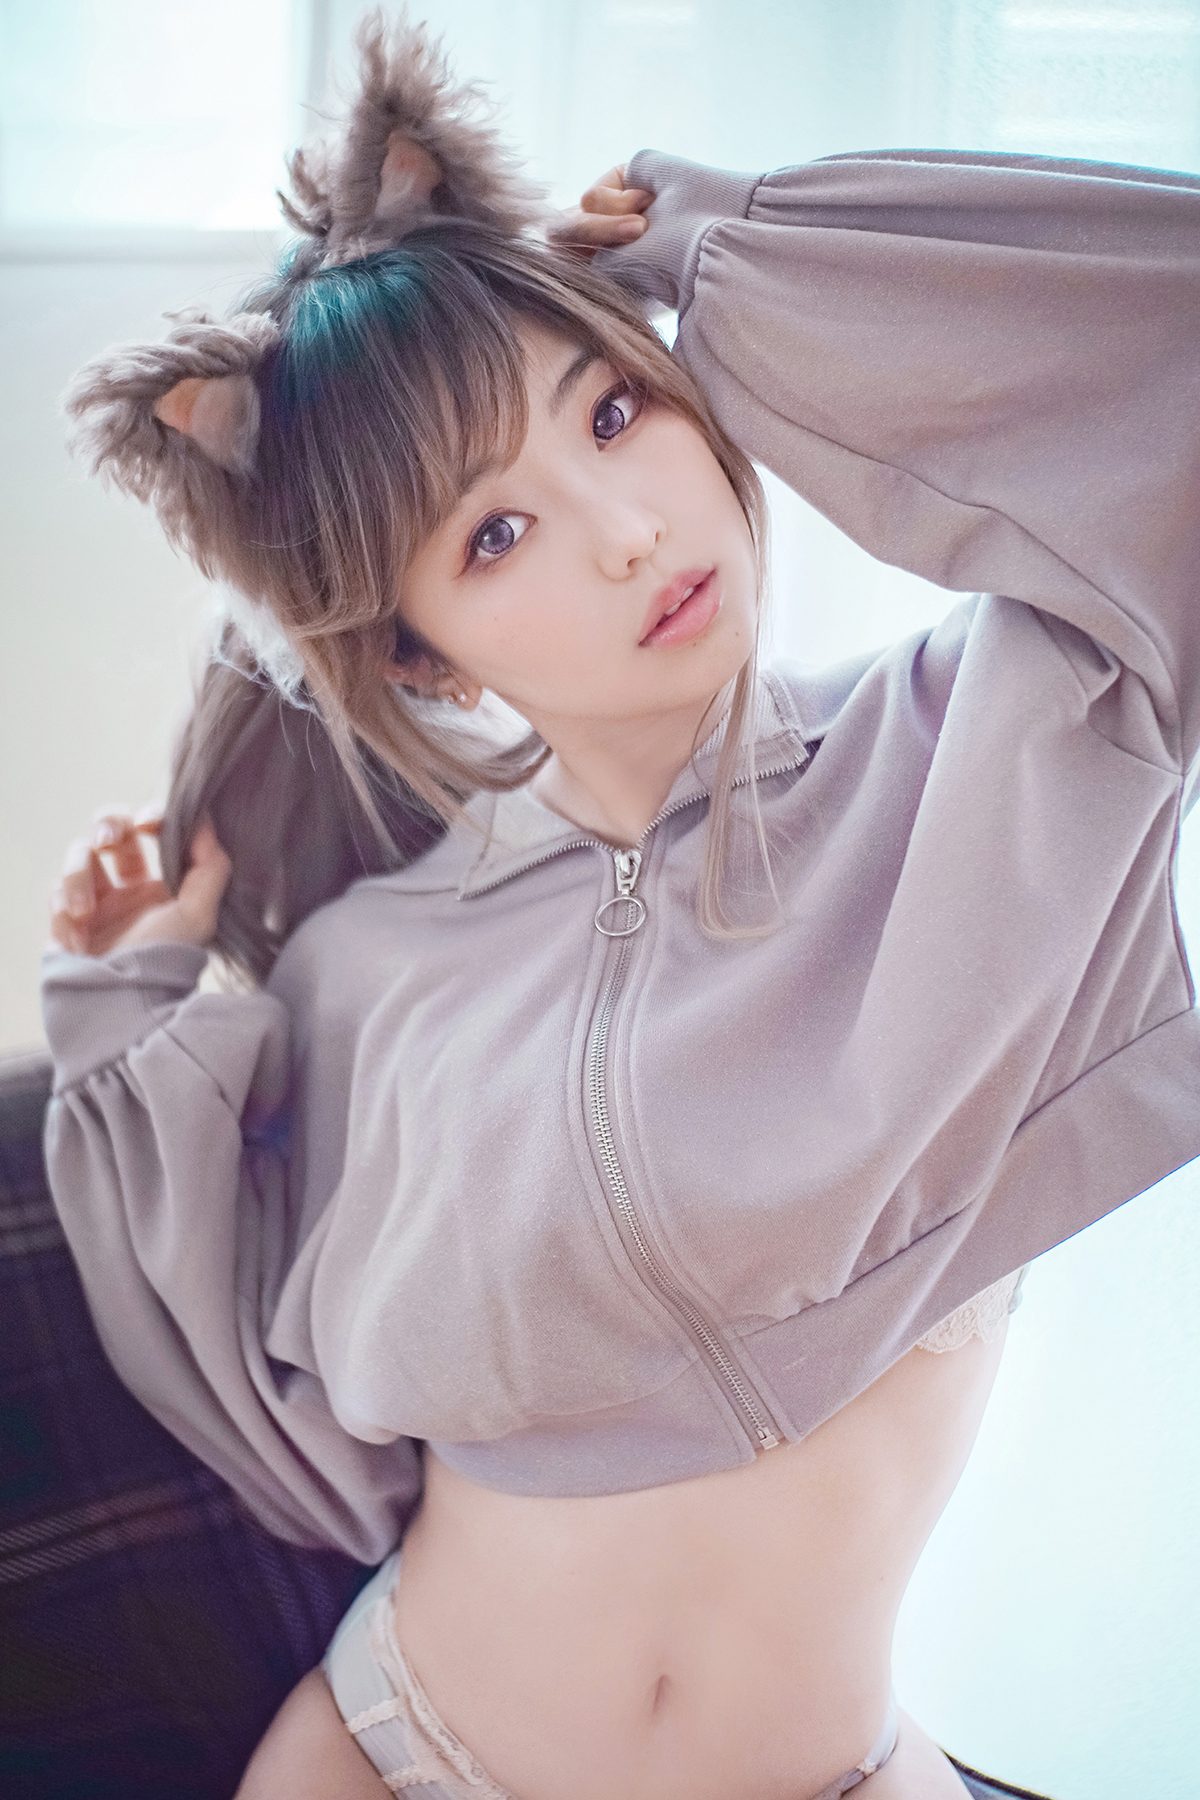 Coser@Ely_eee ElyEE子 – Stay Home with Me Part2